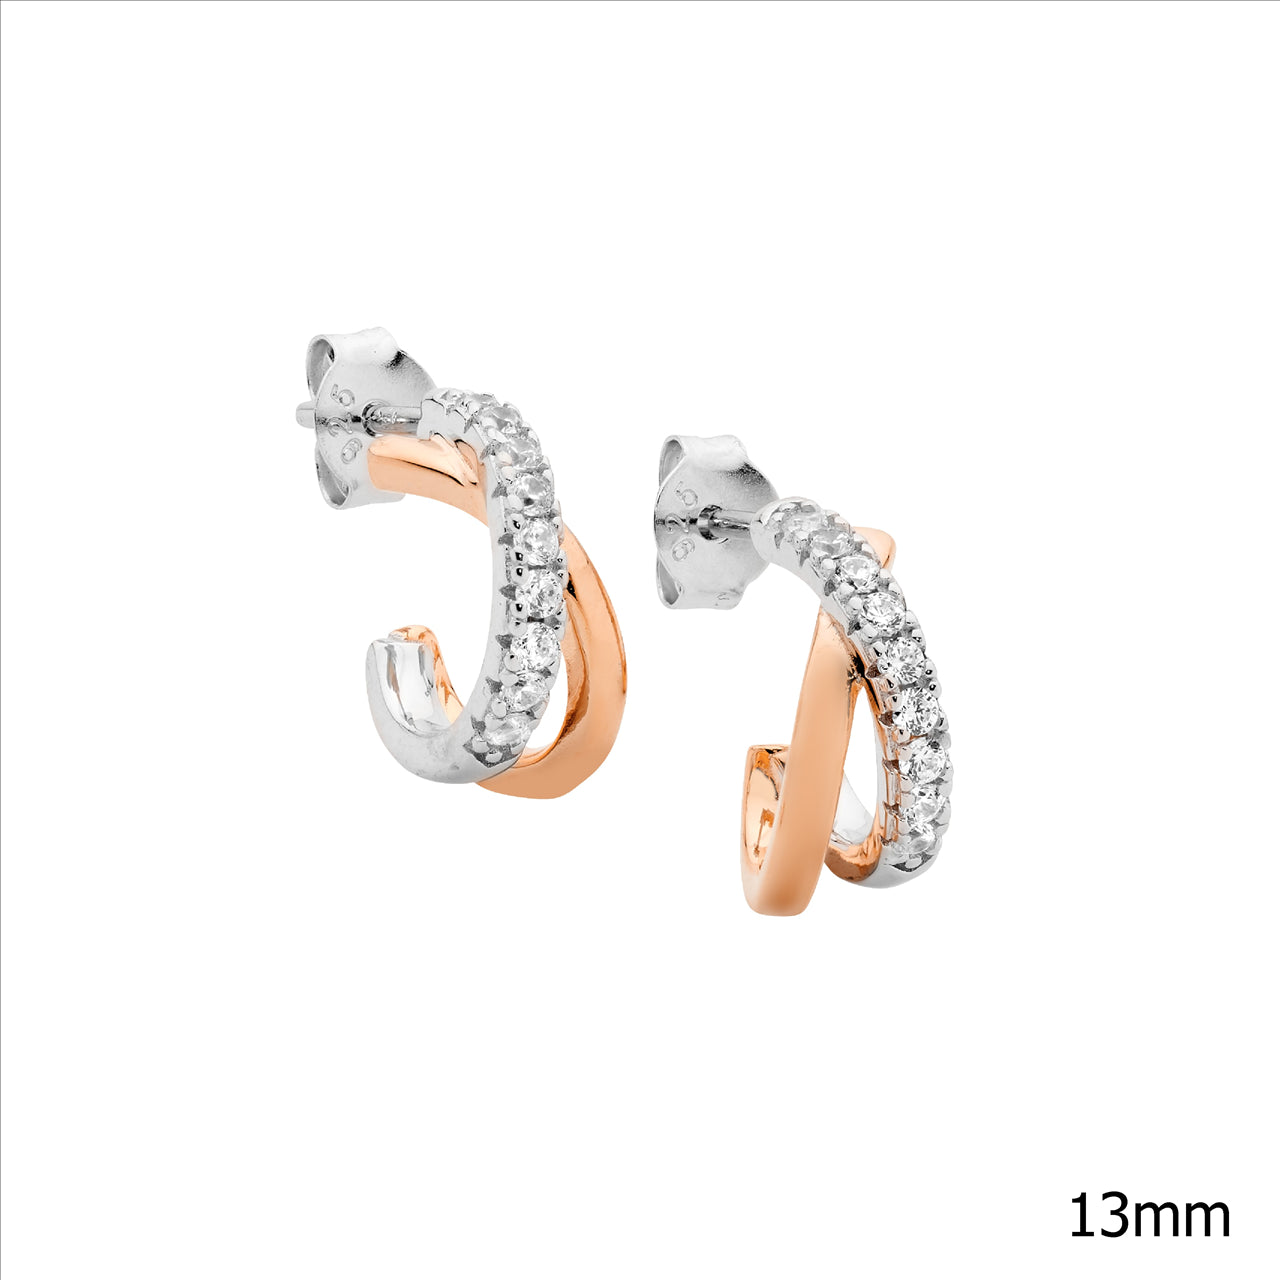 Sterling Silver Rose Gold Plated 13mm Cross Over Hoop Stud Earrings Set With White Cubic Zirconia's